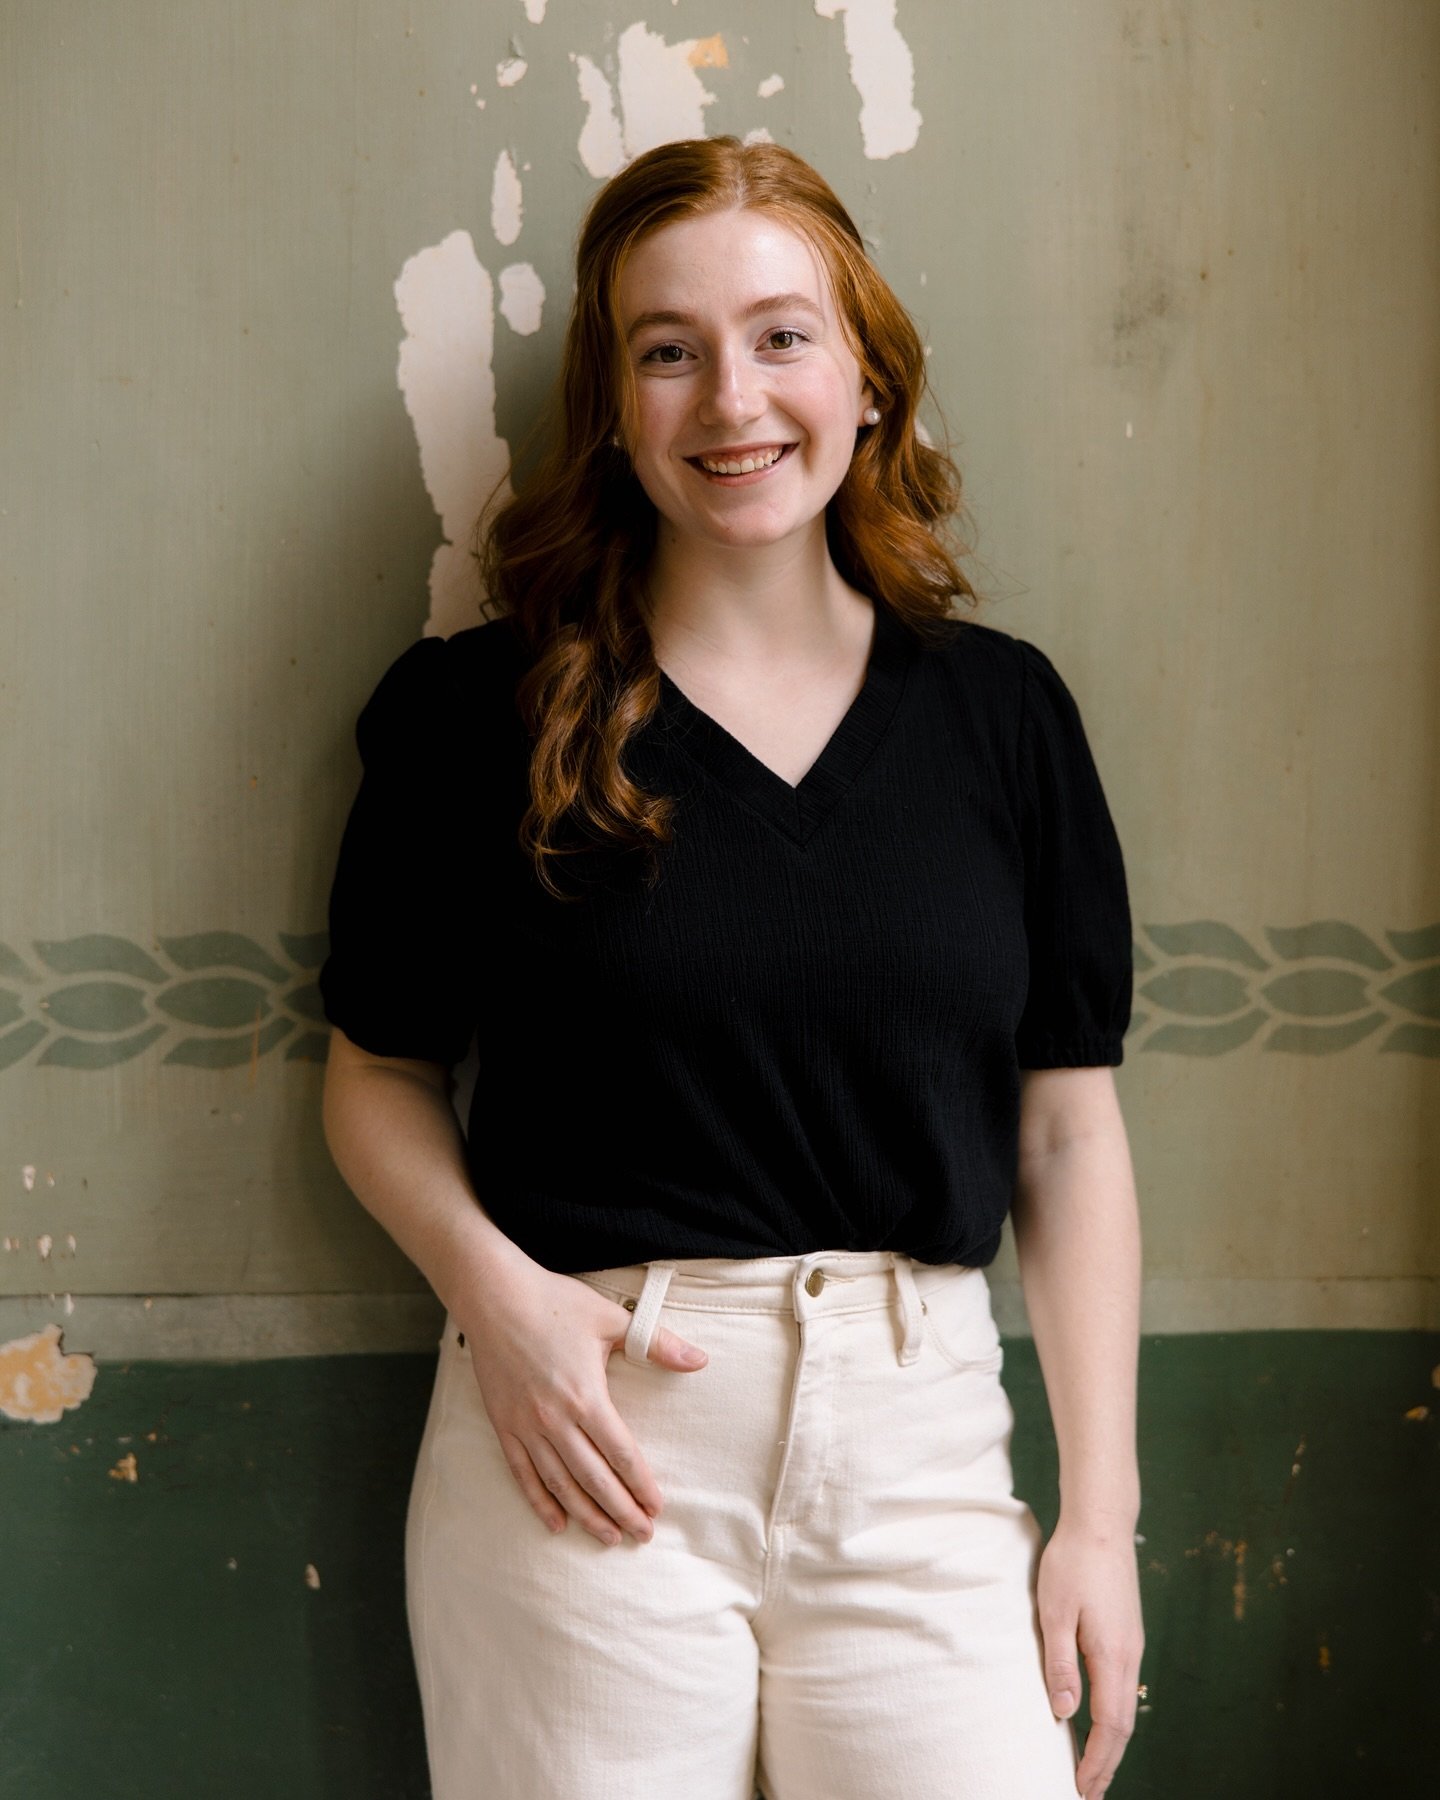 Fresh off her Day One debut last weekend, meet our coordinator Erin!

That is her natural hair color, and what&rsquo;s crazy is it&rsquo;s nowhere near the most interesting thing about @erin.cahalan. 

Our girl is frog and toad coded, a book club ent